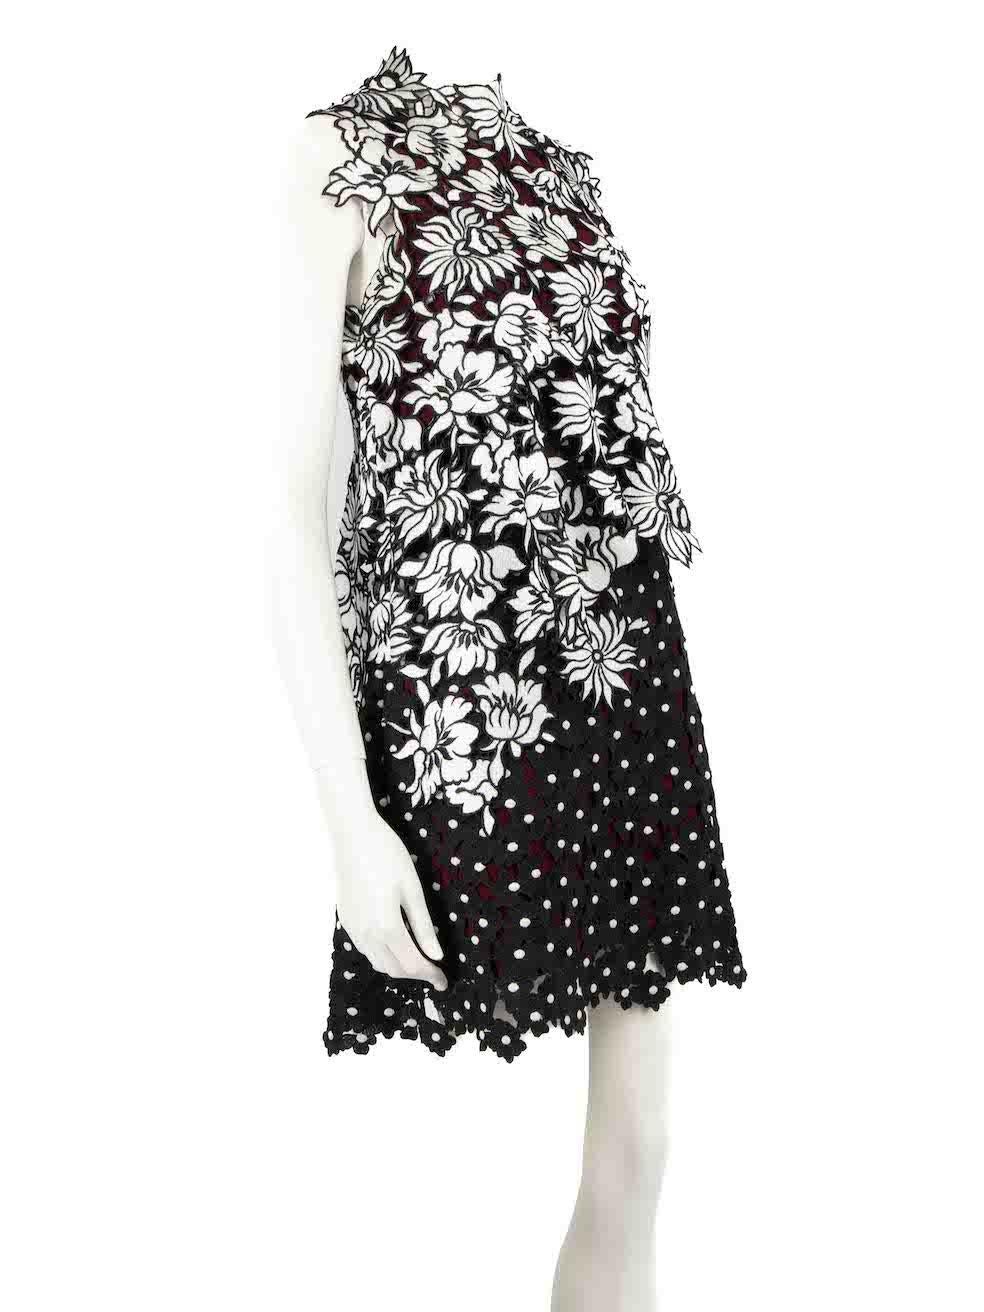 CONDITION is Very good. Minimal wear to dress is evident. Minimal wear to the floral embroidery at the left-side of bust with a loose thread on this used Self-Portrait designer resale item.
 
 
 
 Details
 
 
 Black
 
 Polyester
 
 Dress
 
 Floral